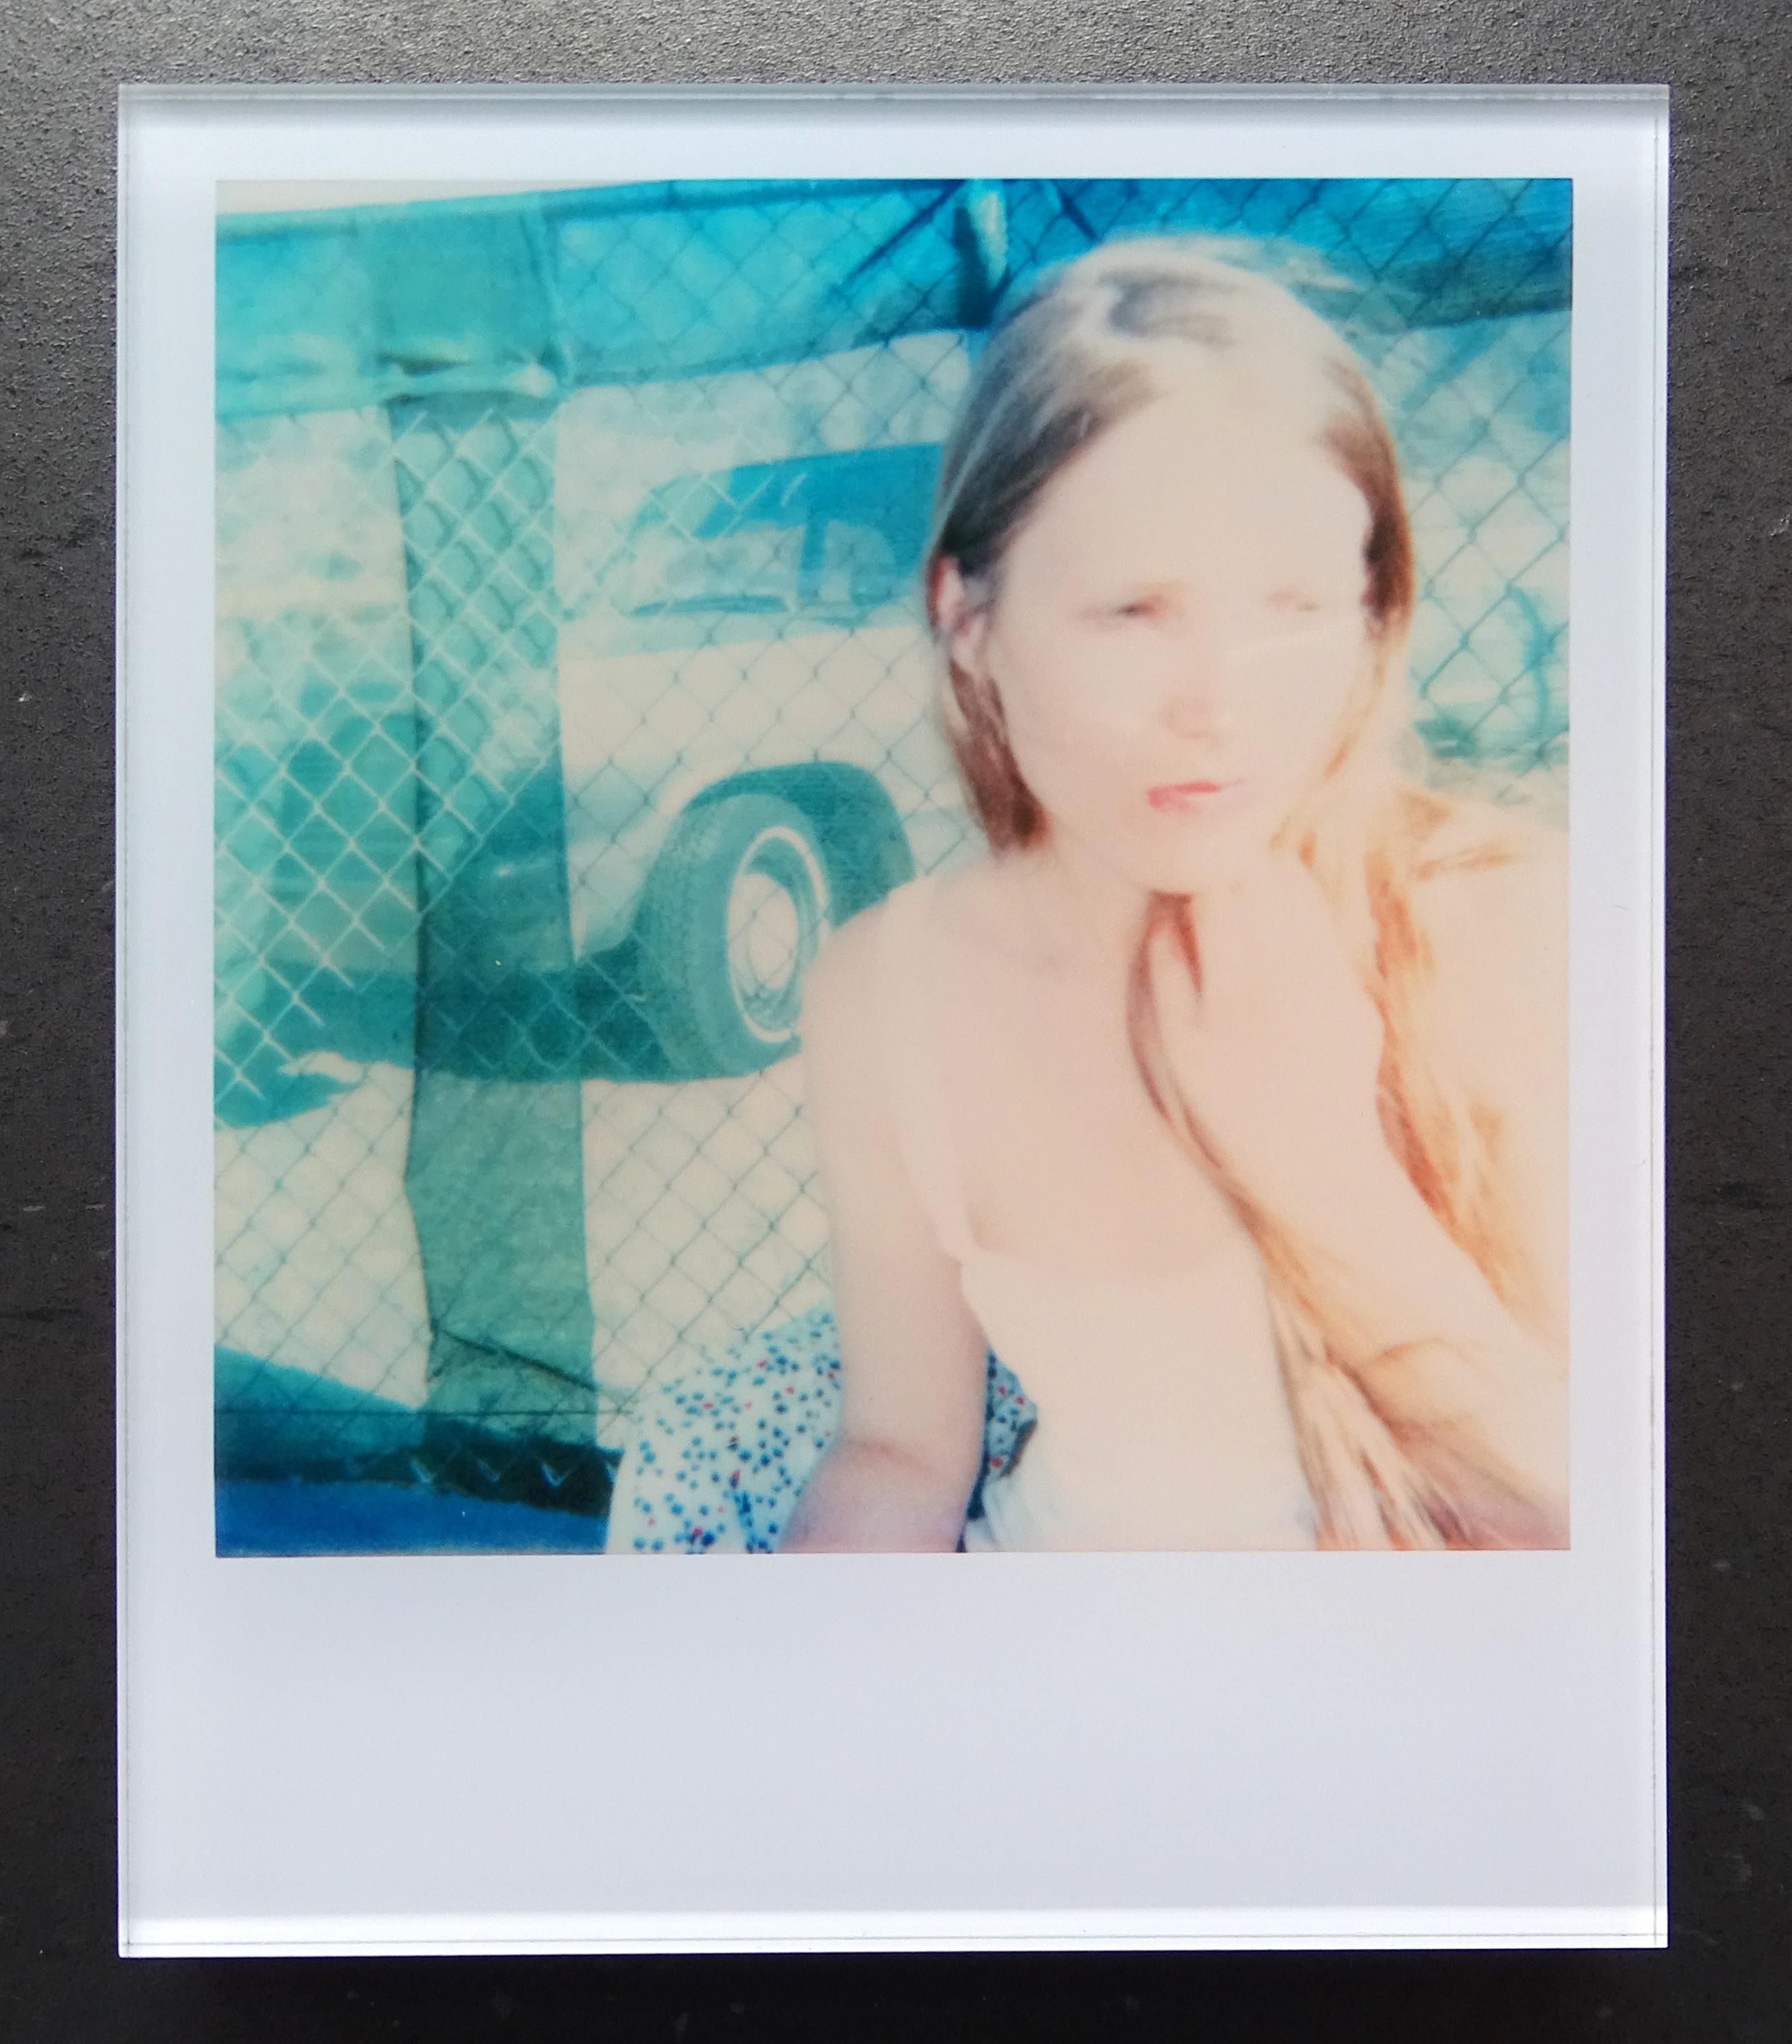 Stefanie Schneider's Minis
'29 Day Dreams' (29 Palms, CA), 2005
signed and signature brand on verso
Lambda digital Color Photographs based on a Polaroid

Polaroid sized open Editions 1999-2013
10.7 x 8.8cm (Image 7.9x7.7cm)
mounted: sandwiched in